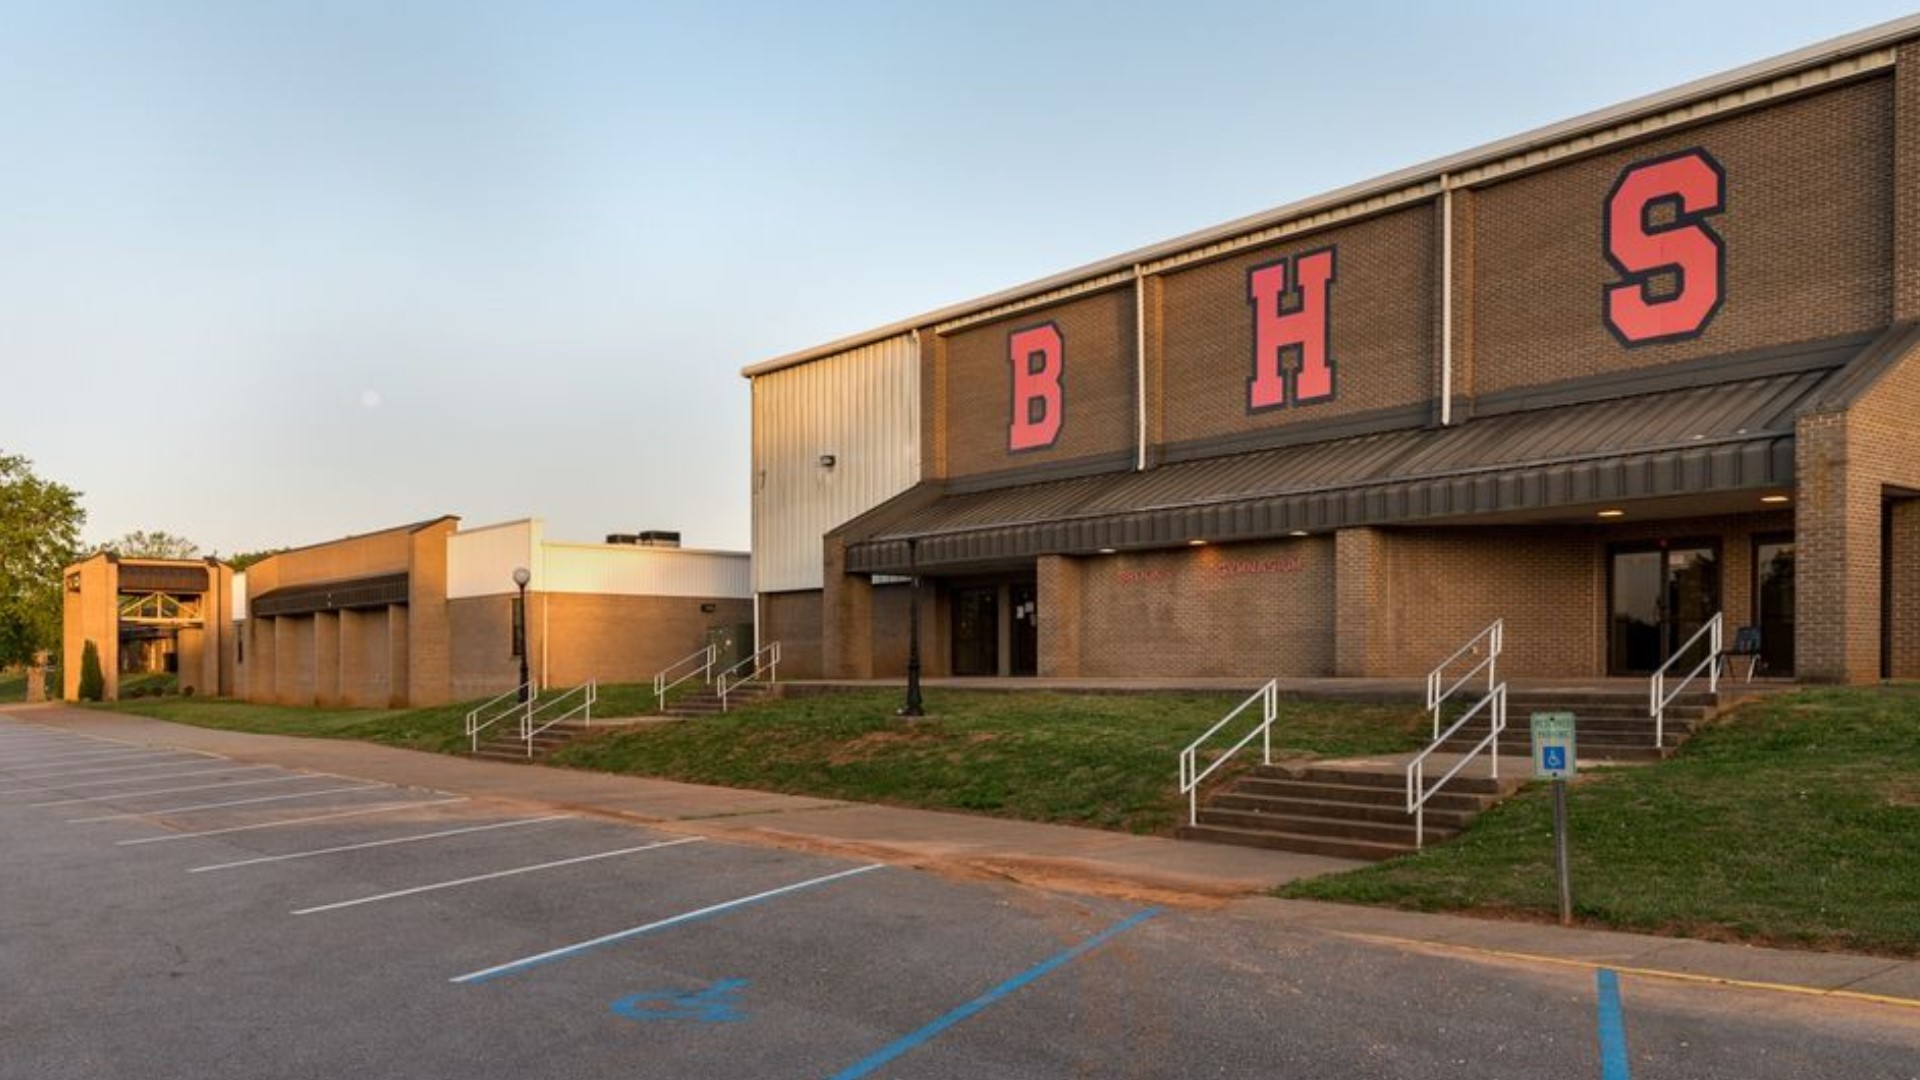 Investigation into possible sexual misconduct at Brooks High